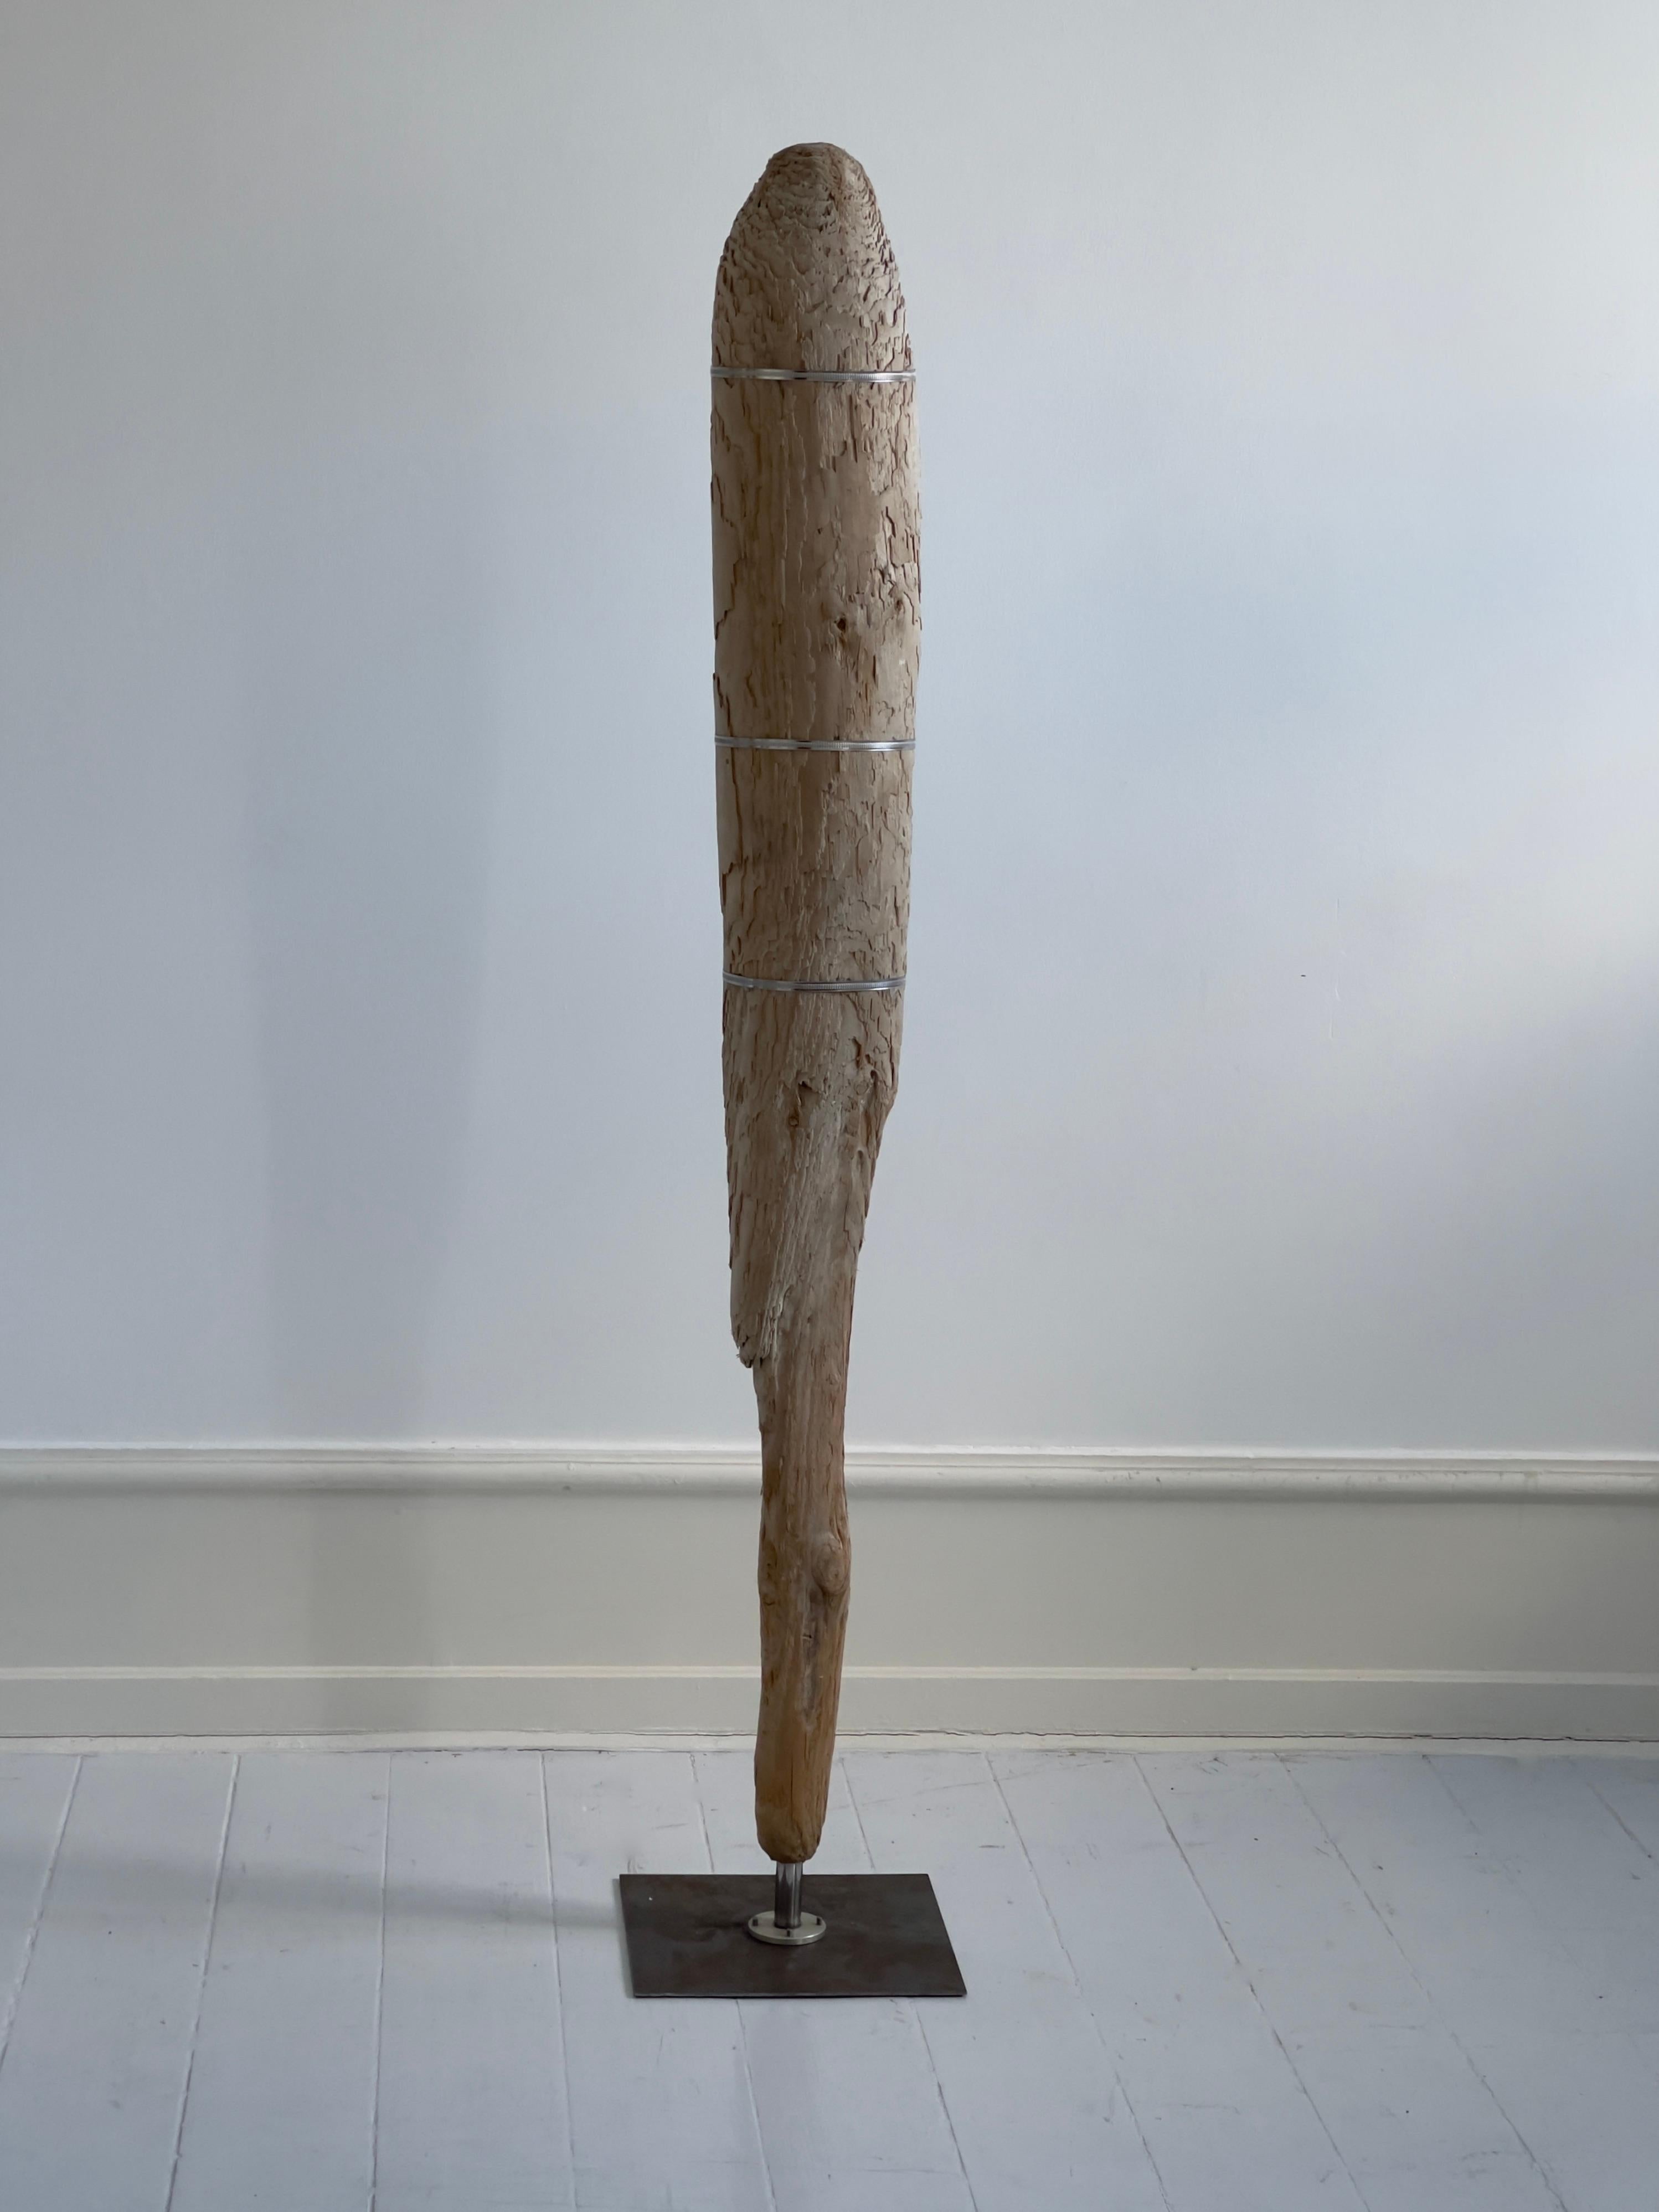 Contemporary  Unique Human Size Decor of a Drift Timber Sculpture on Metal Stand. For Sale